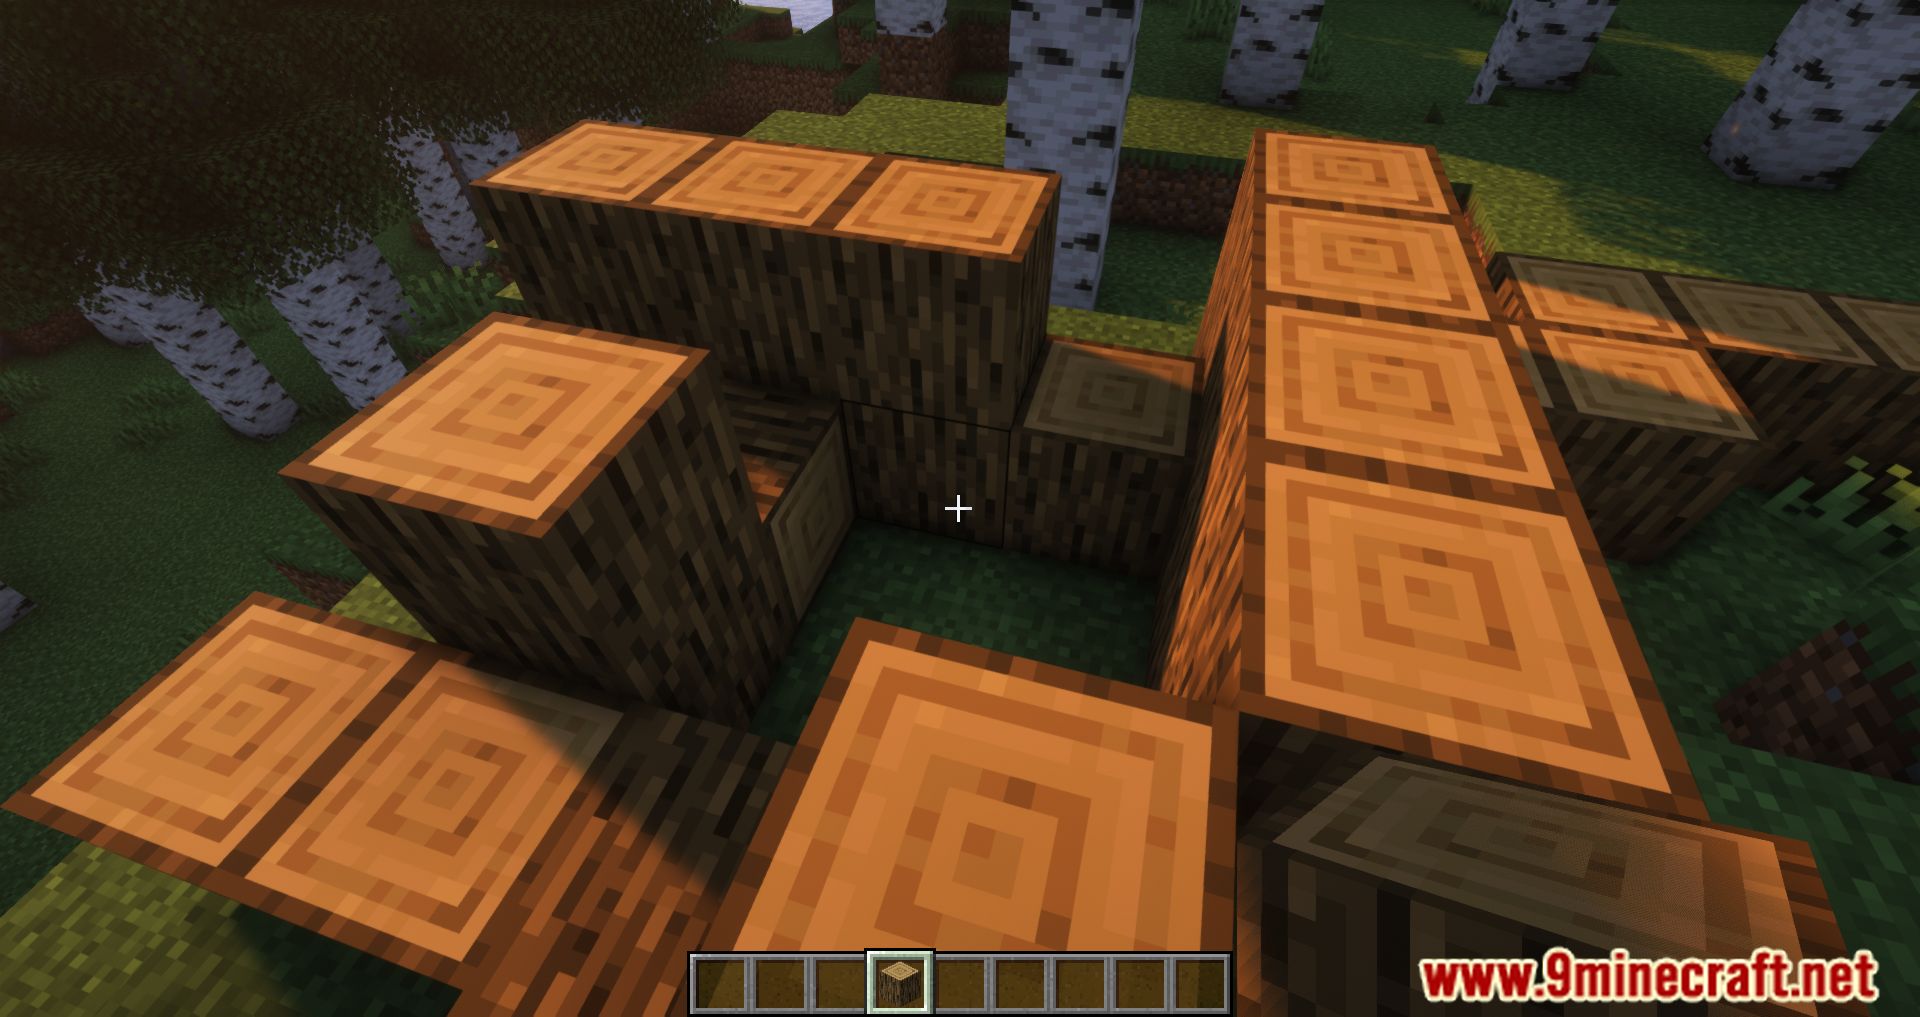 Precise Block Placing Mod (1.19.3, 1.18.2) - Brings A New Feature 9